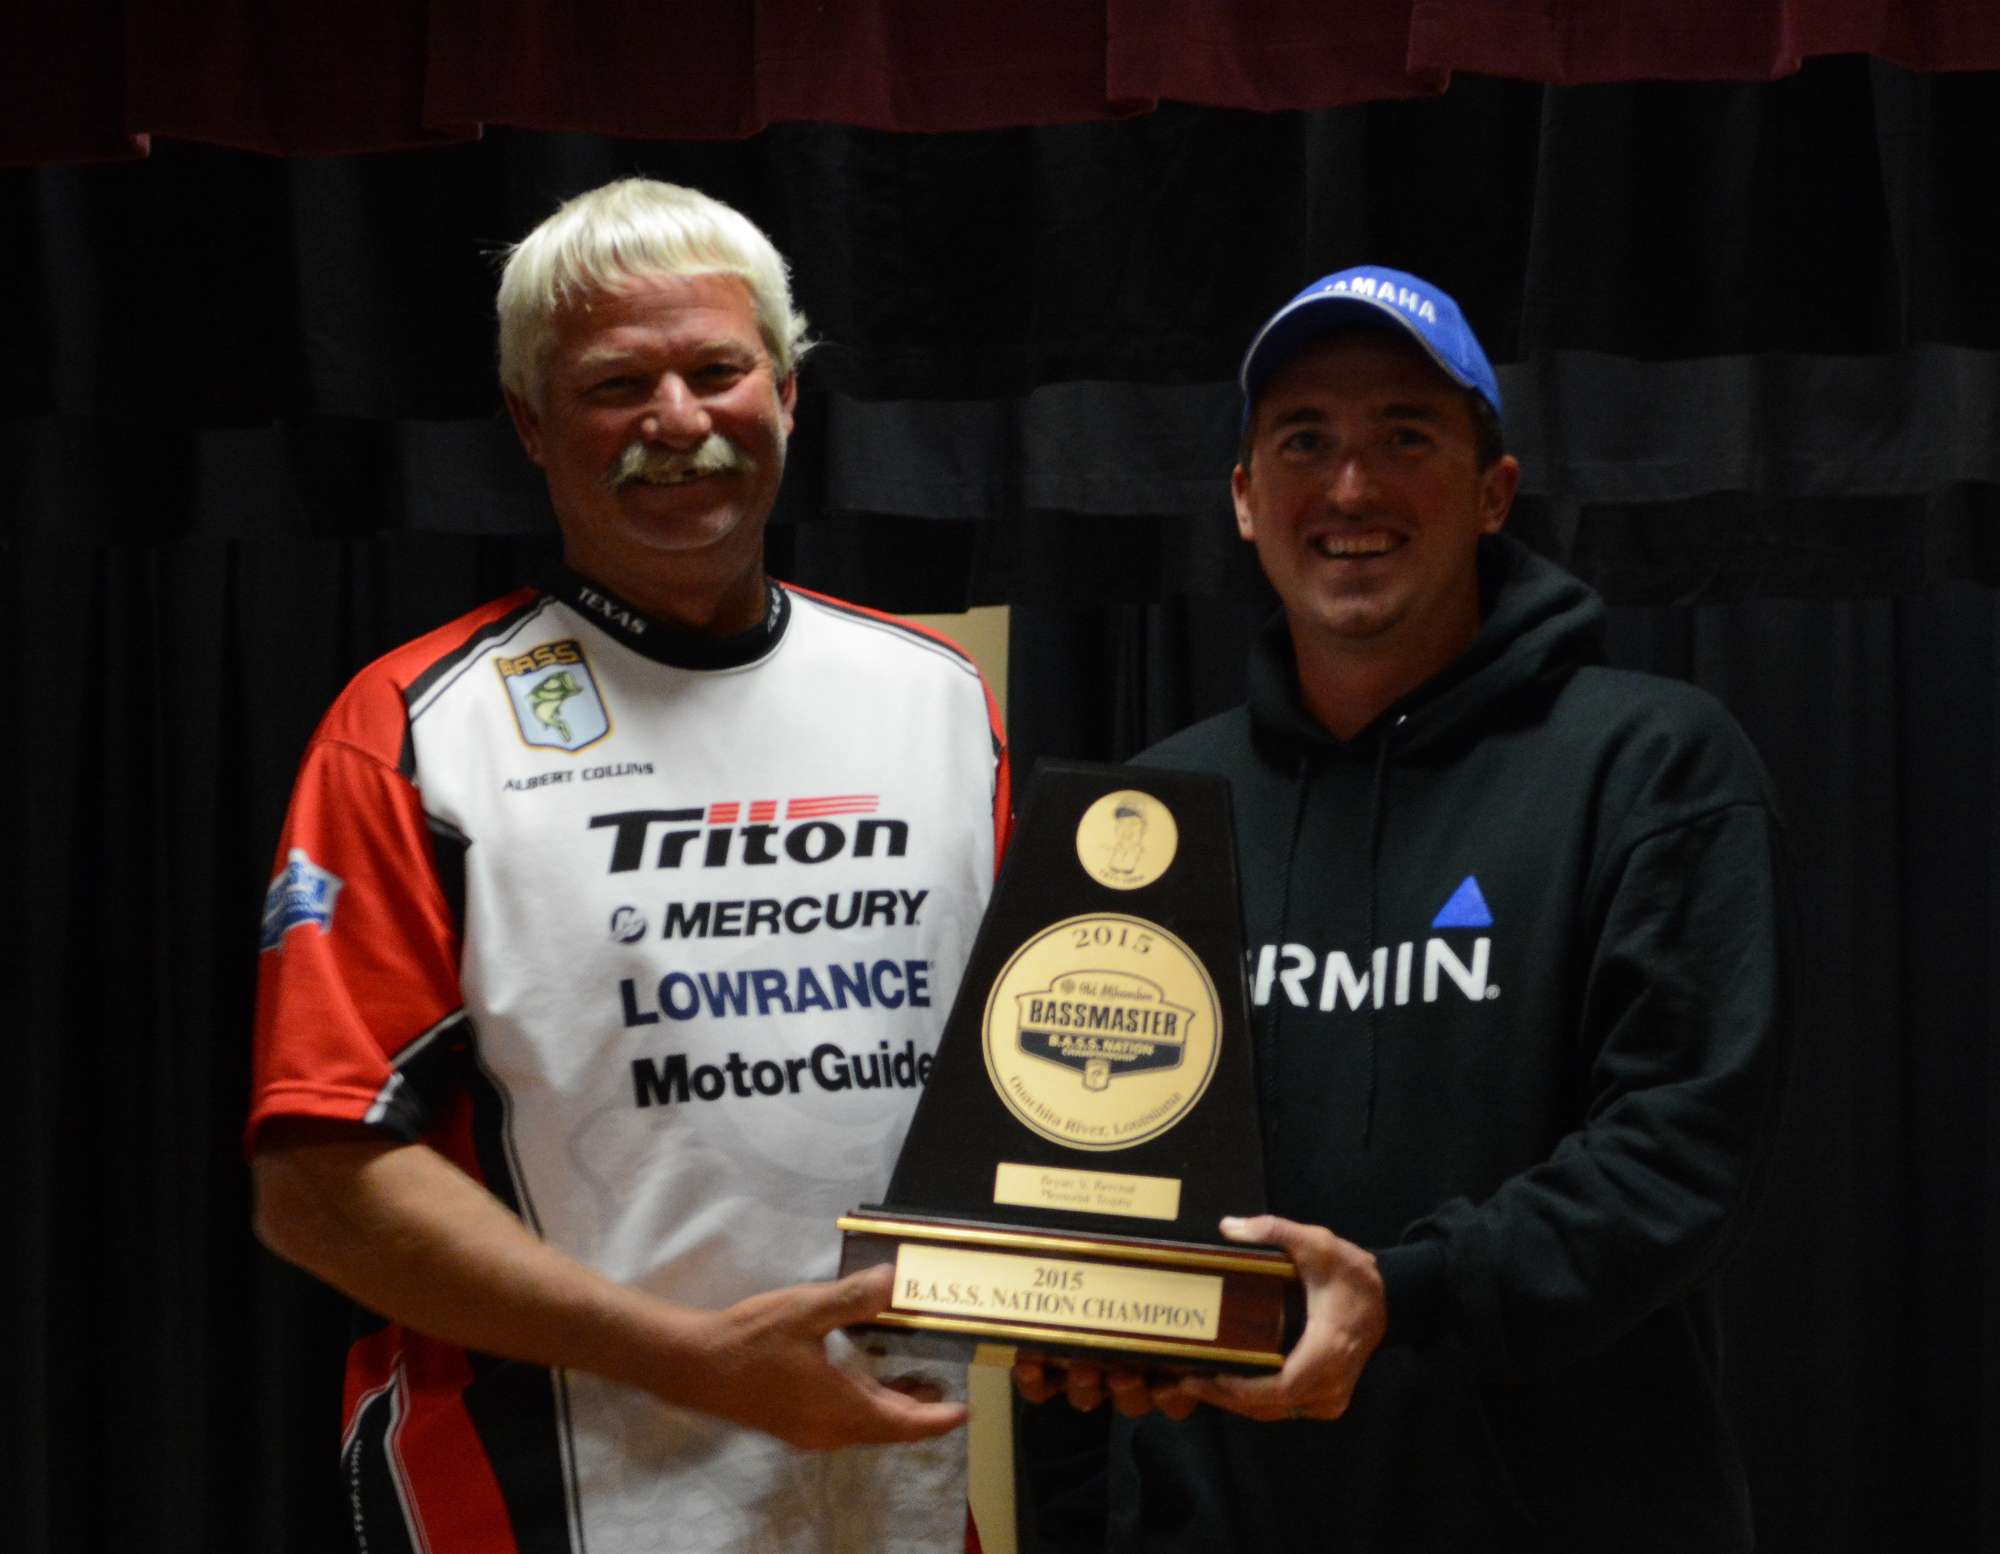 B.A.S.S. Nation Championship winners are invited to compete in the Bassmaster Elite Series. Mueller accepted his invitation last year and just finished his rookie year. Collins just received his invitation and gets some time to think about it.